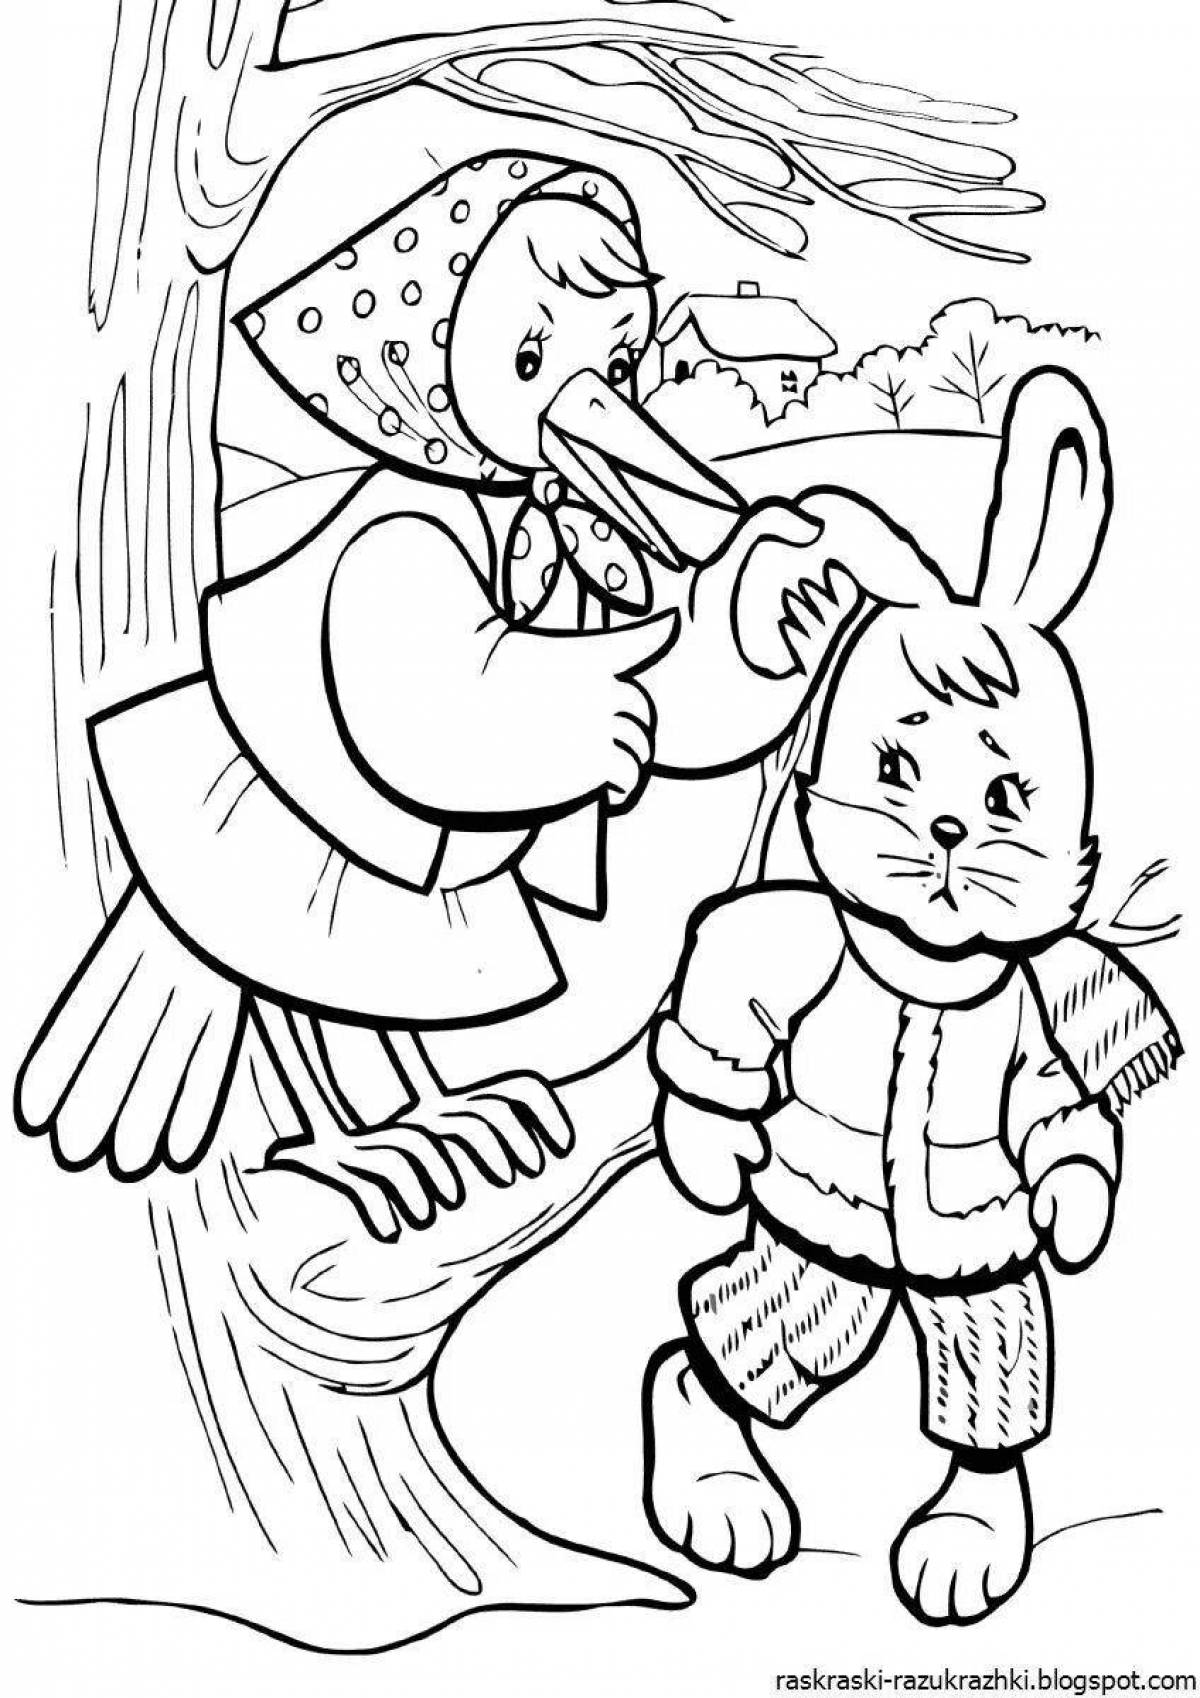 Radiant coloring for children 3-4 years old Russian folk tales